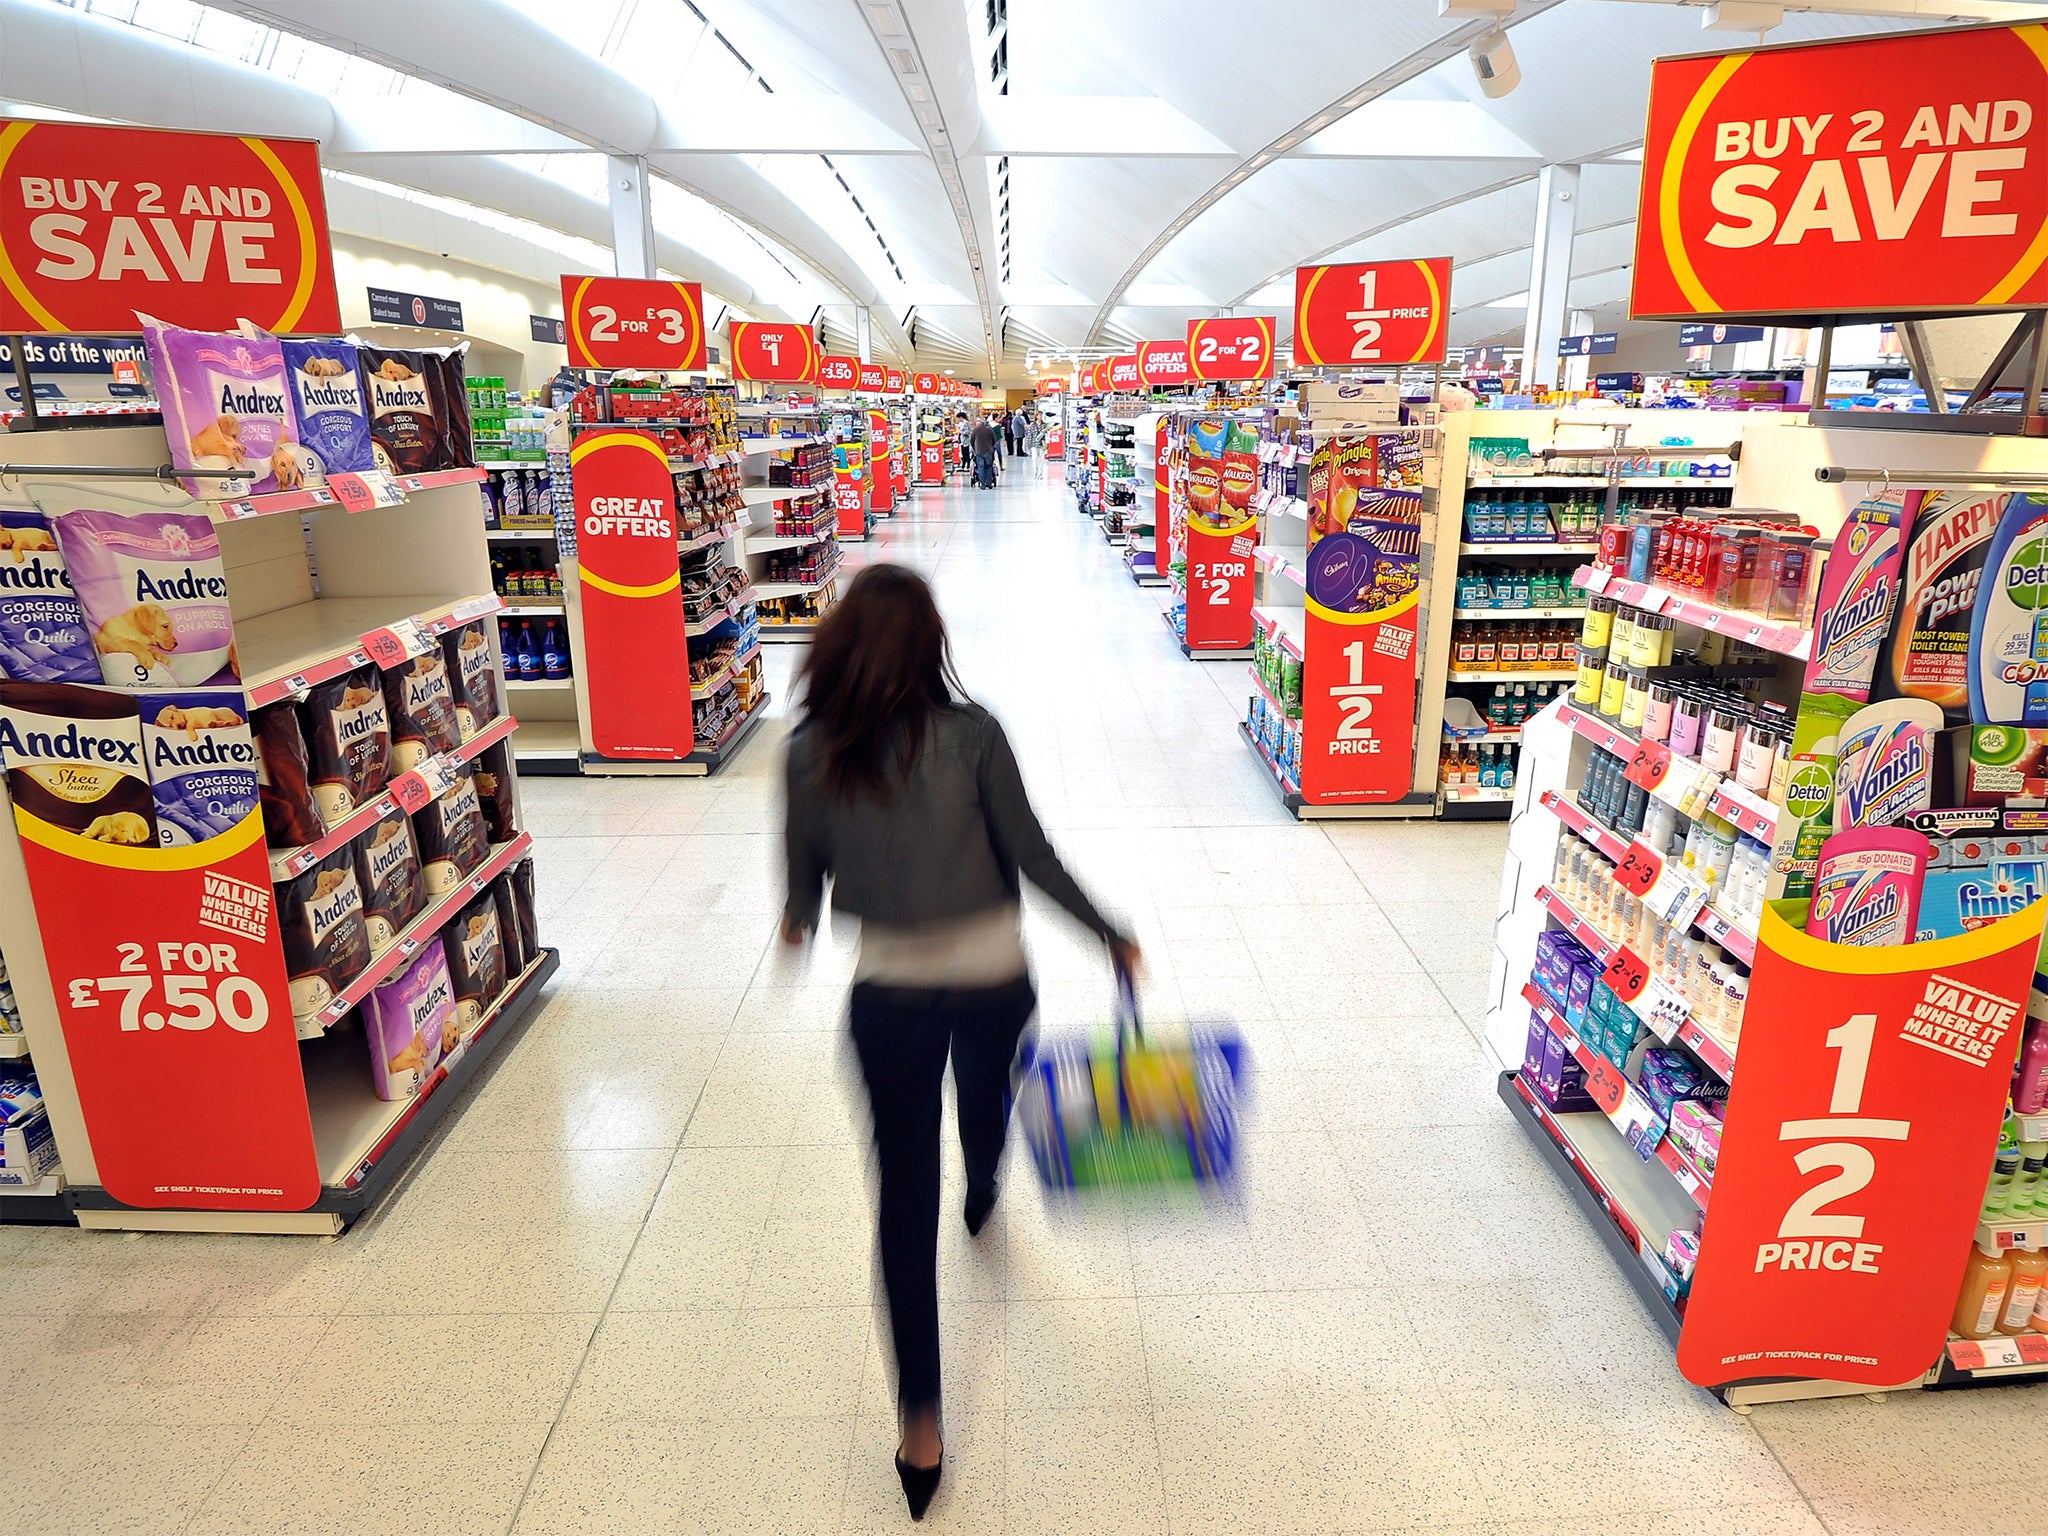 Bagging a bargain? Sainsbury’s Basics range competes with the discounters’ prices